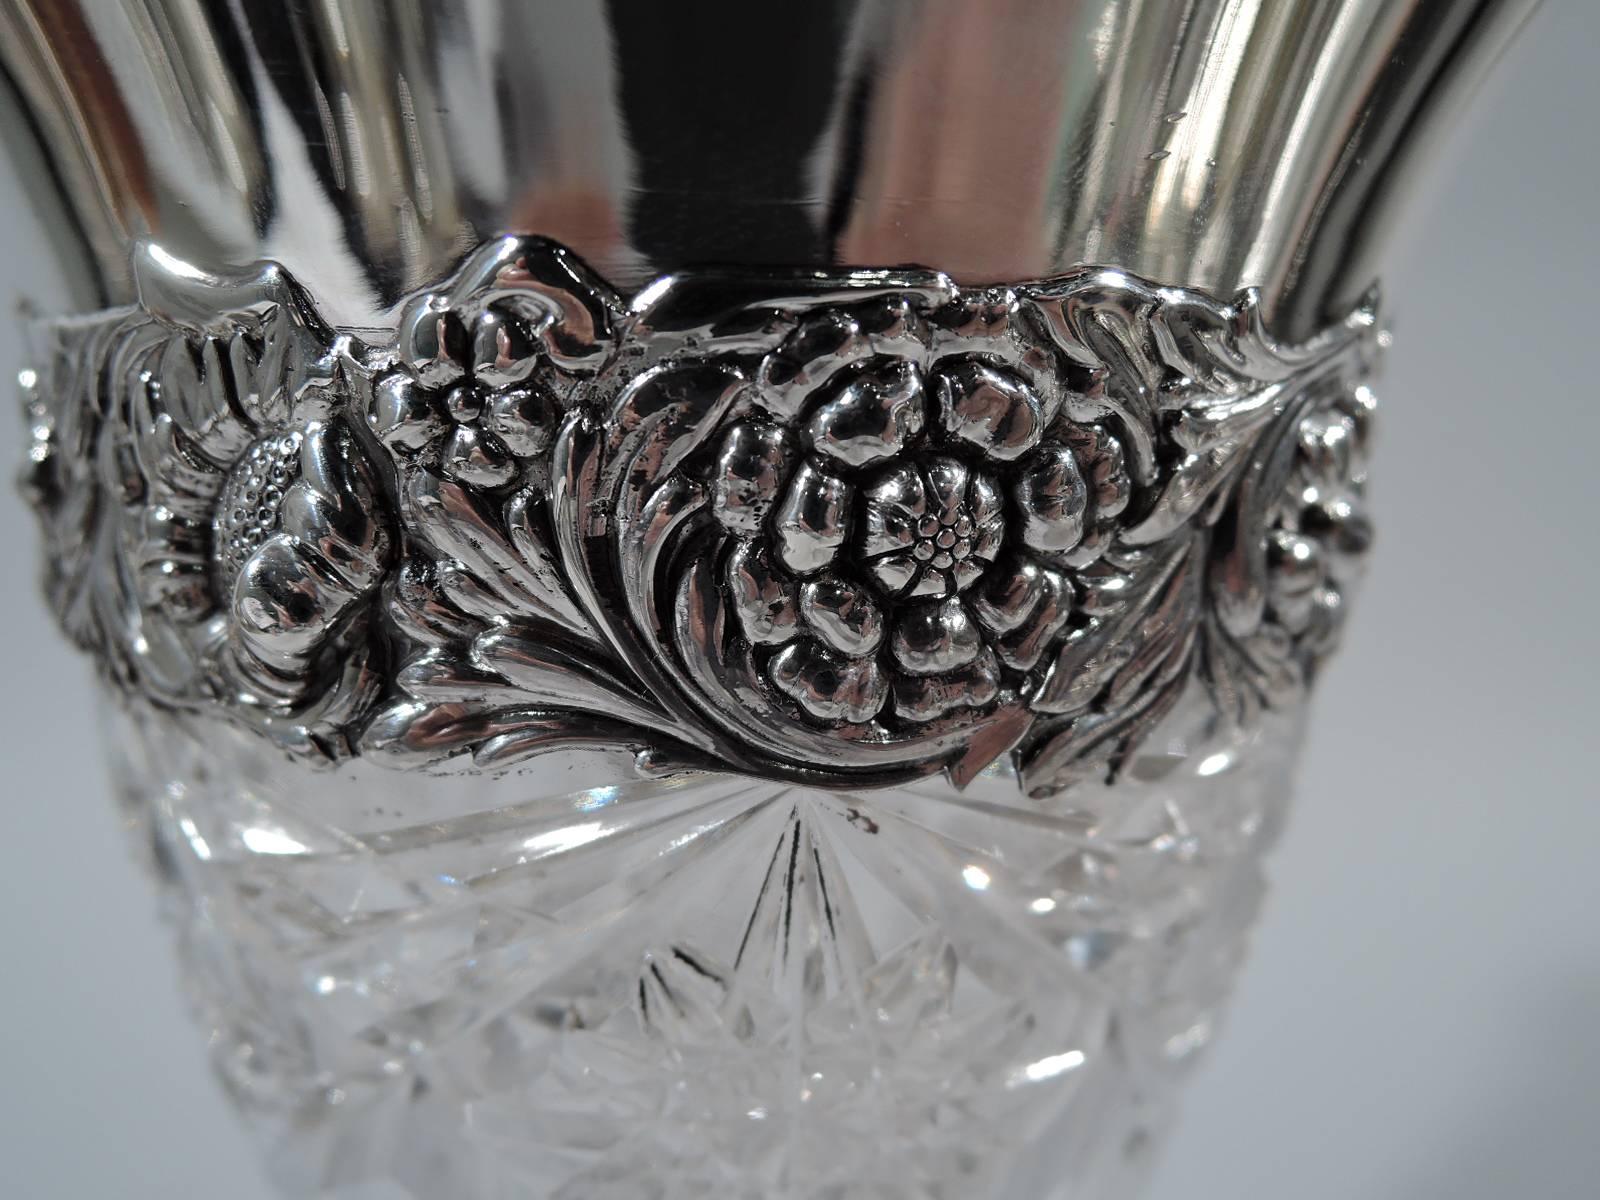 Brilliant-cut-glass vase with sterling silver collar. Made by Tiffany & Co. in New York, circa 1910. Fluted and waisted with cut notches, stars, and diaper pattern. Collar has flared rim with repousse flowers. Hallmark includes director’s letter m,